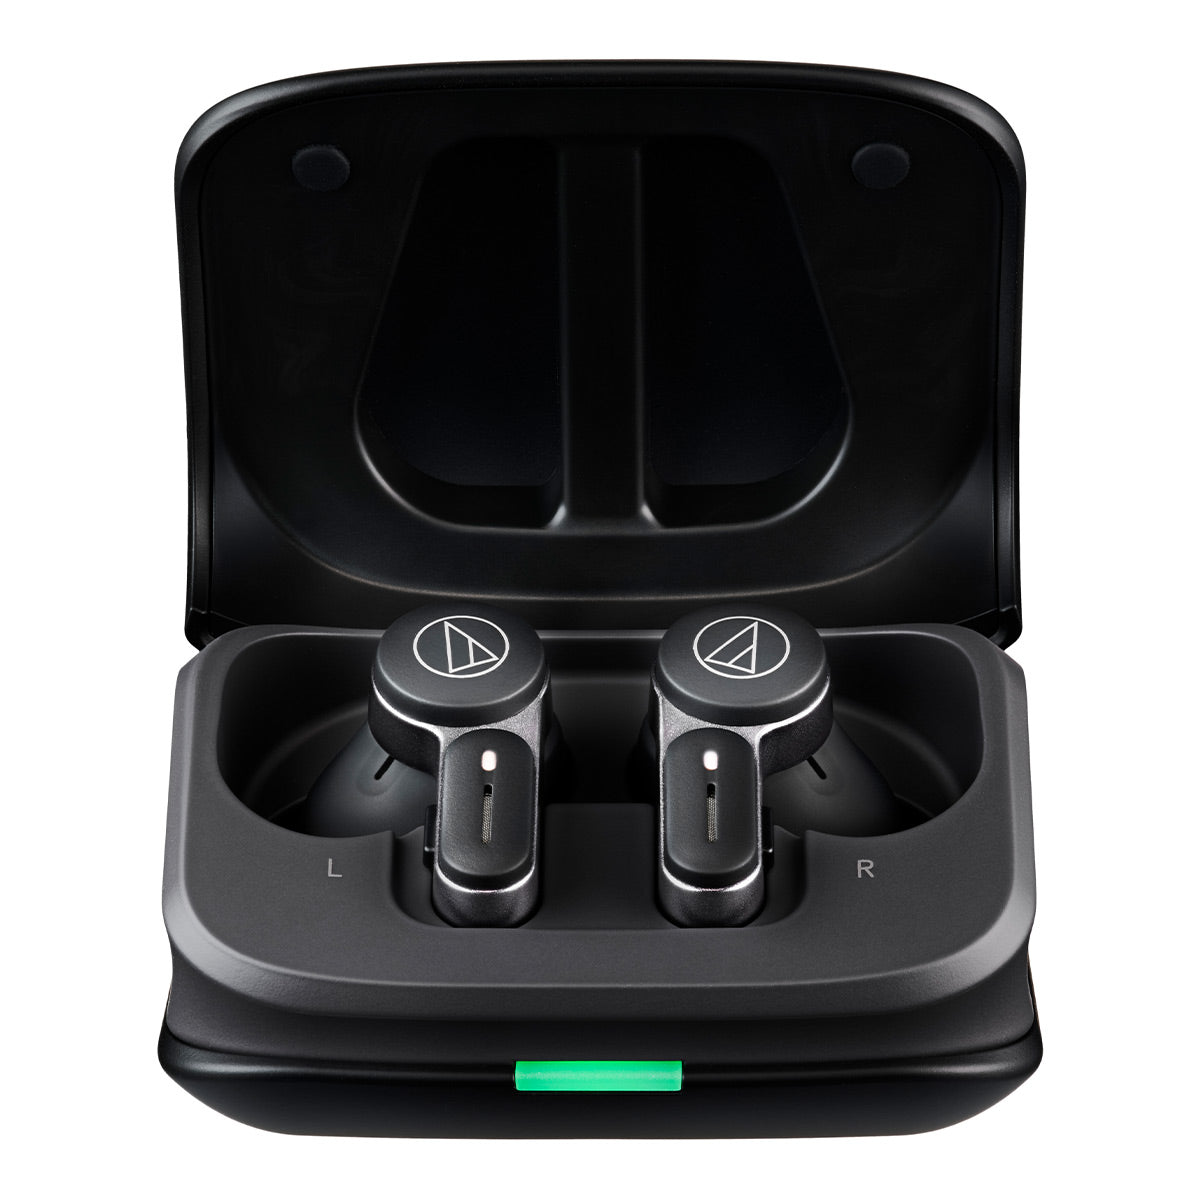 AudioTechnica ATH-TWX7 Truly Wireless Earbuds (Black)